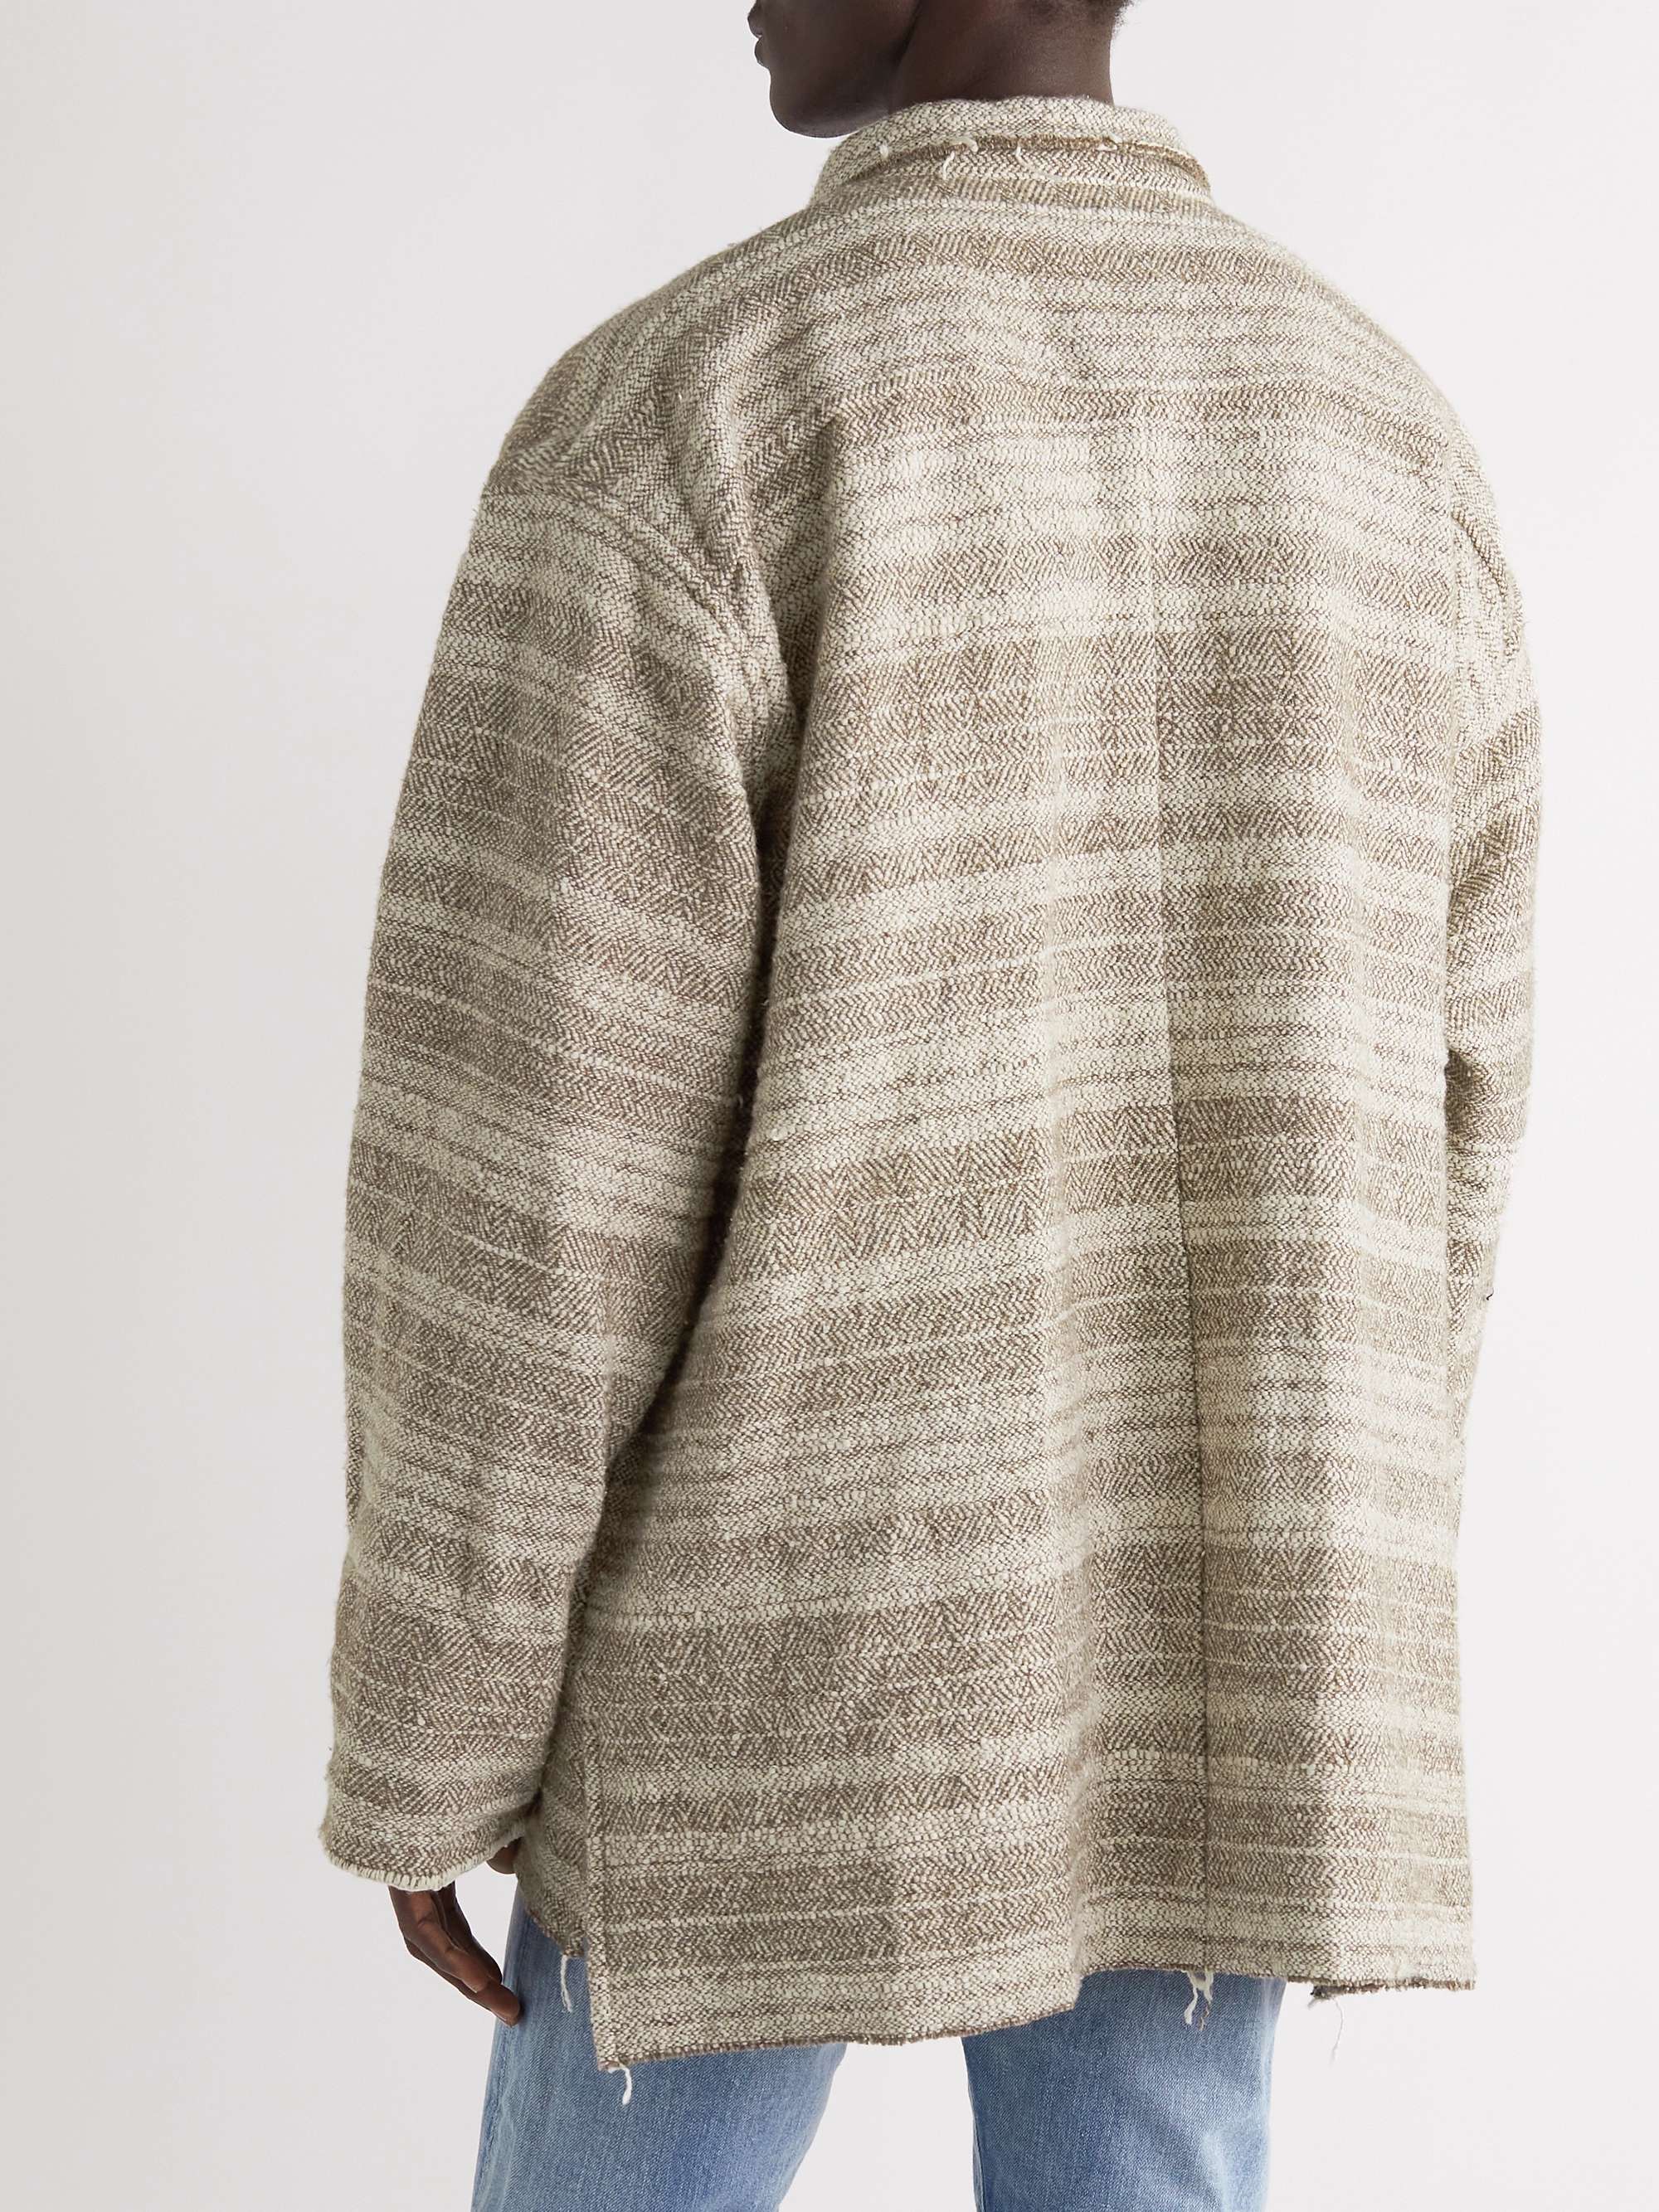 COTTLE Earth Wall Champetre Organic Cotton, Wool, and Cashmere-Blend Brocade Jacket